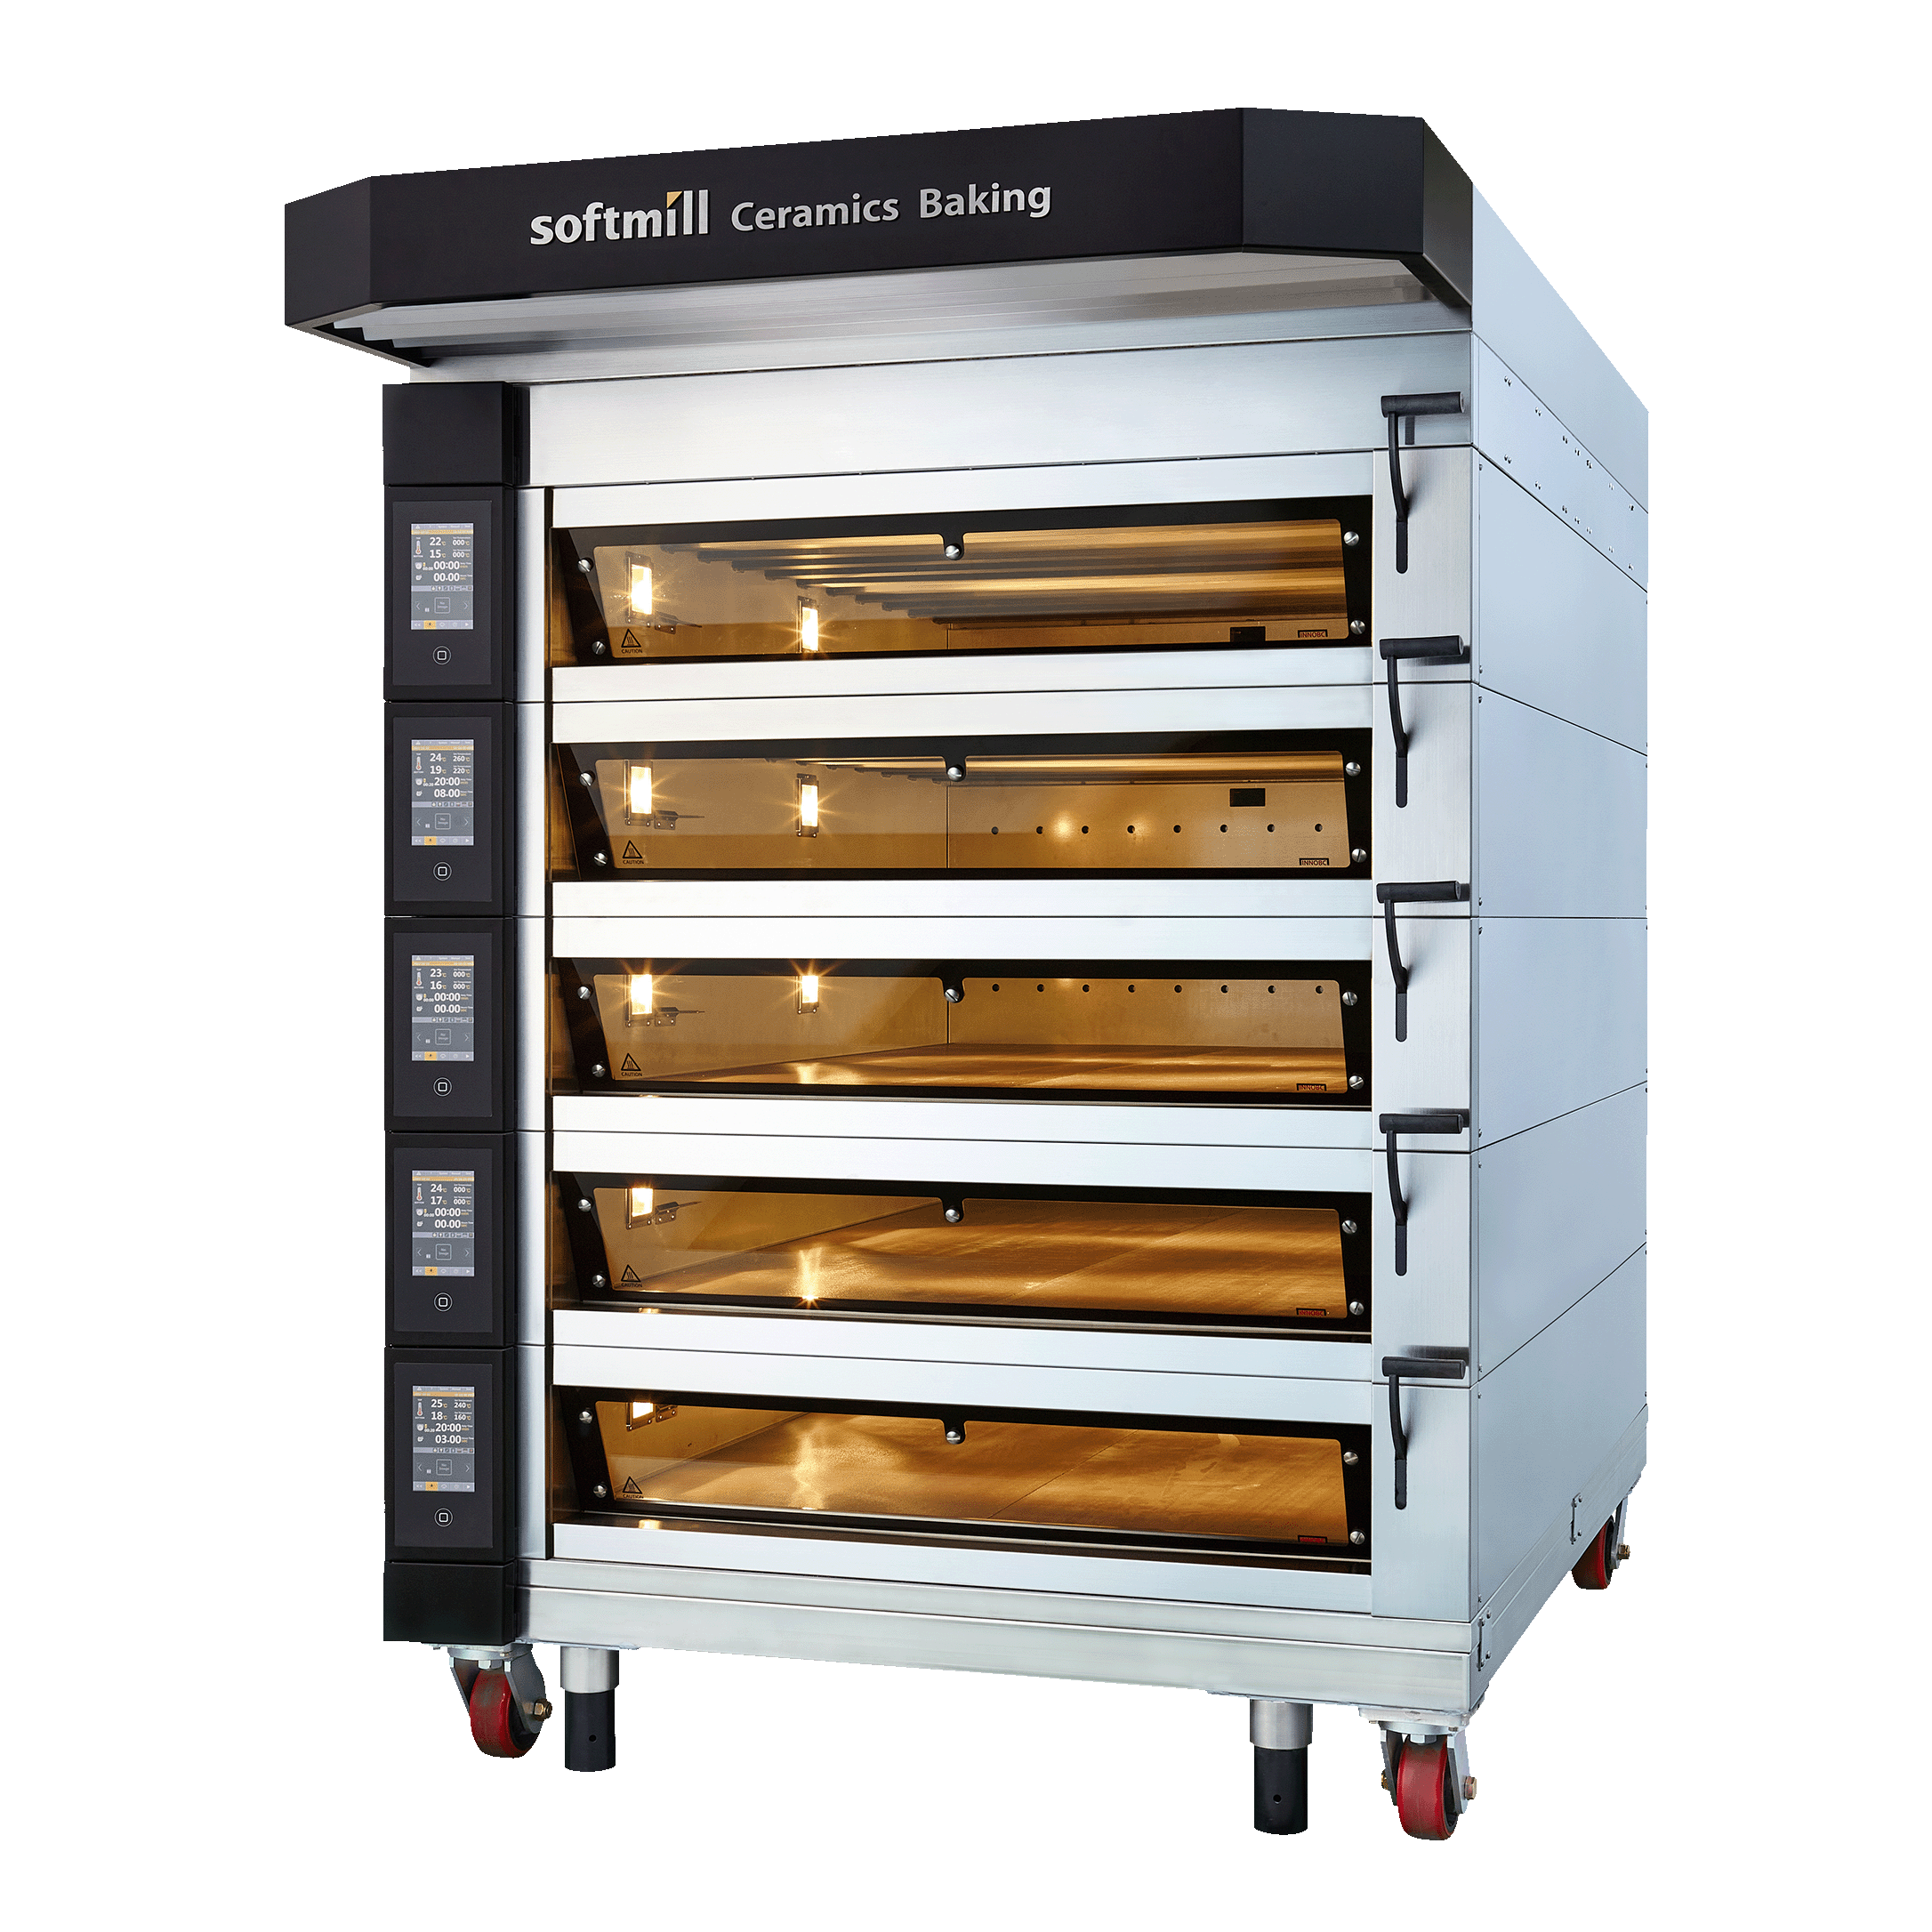 InnoBC Oven 8 trays 5 tiers main mini size images